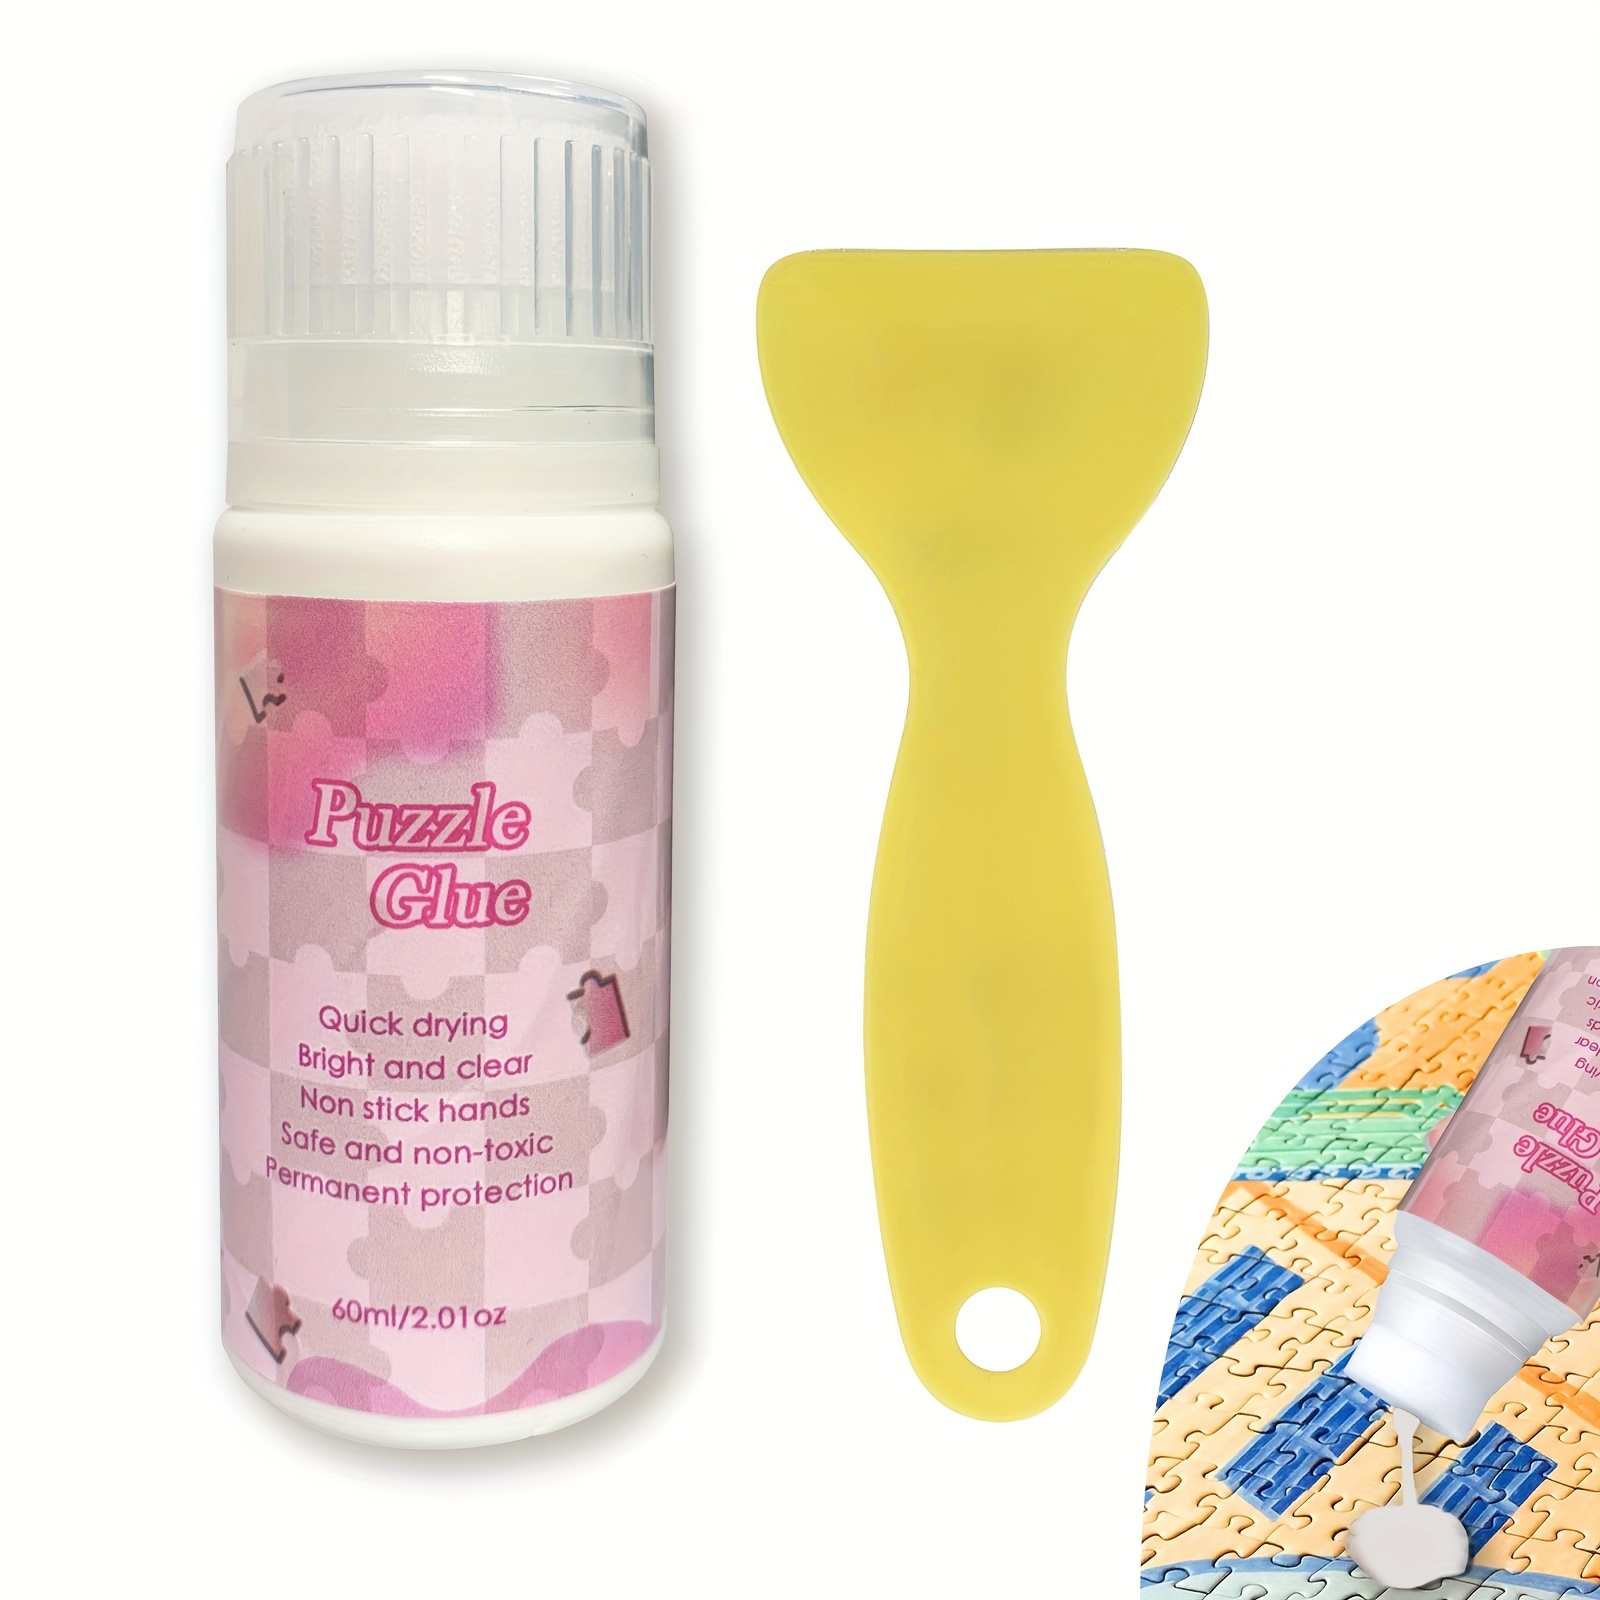 Jigsaw Puzzle Glue with Applicator - Saves, Laminates and Preserves  Finished Jigsaw Puzzles - Easy to Apply, Dries Quick, Clear & Bright